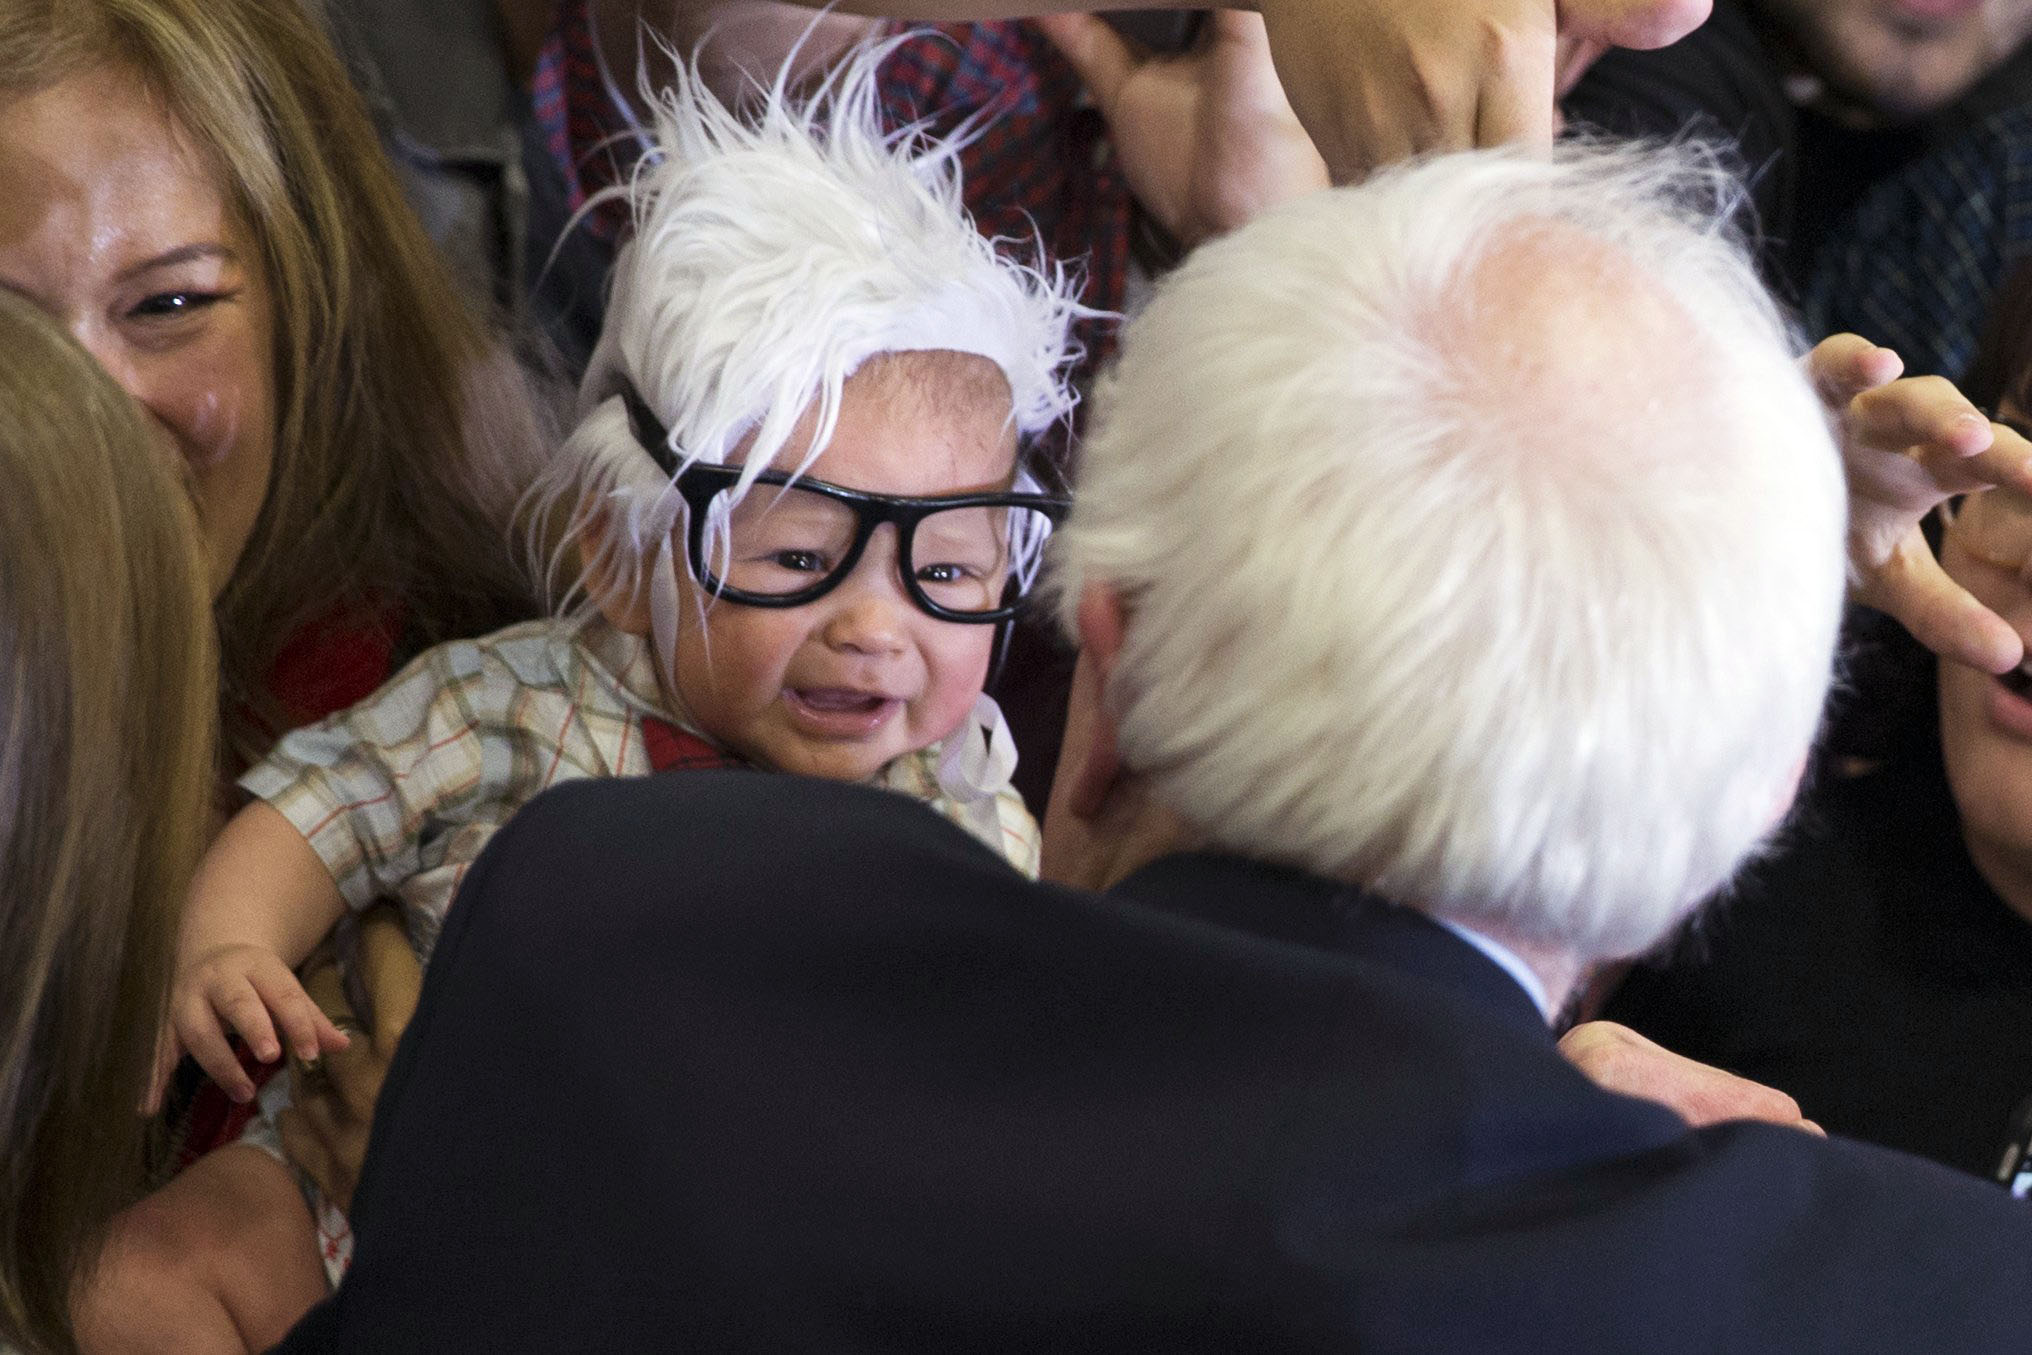 Democratic presidential candidate Sen. Bernie Sanders, I-Vt., meets 3-month-old Oliver Lomas, of Venice, Calif., during a rally at Bonanza High School, on Feb. 14, 2016, in Las Vegas.